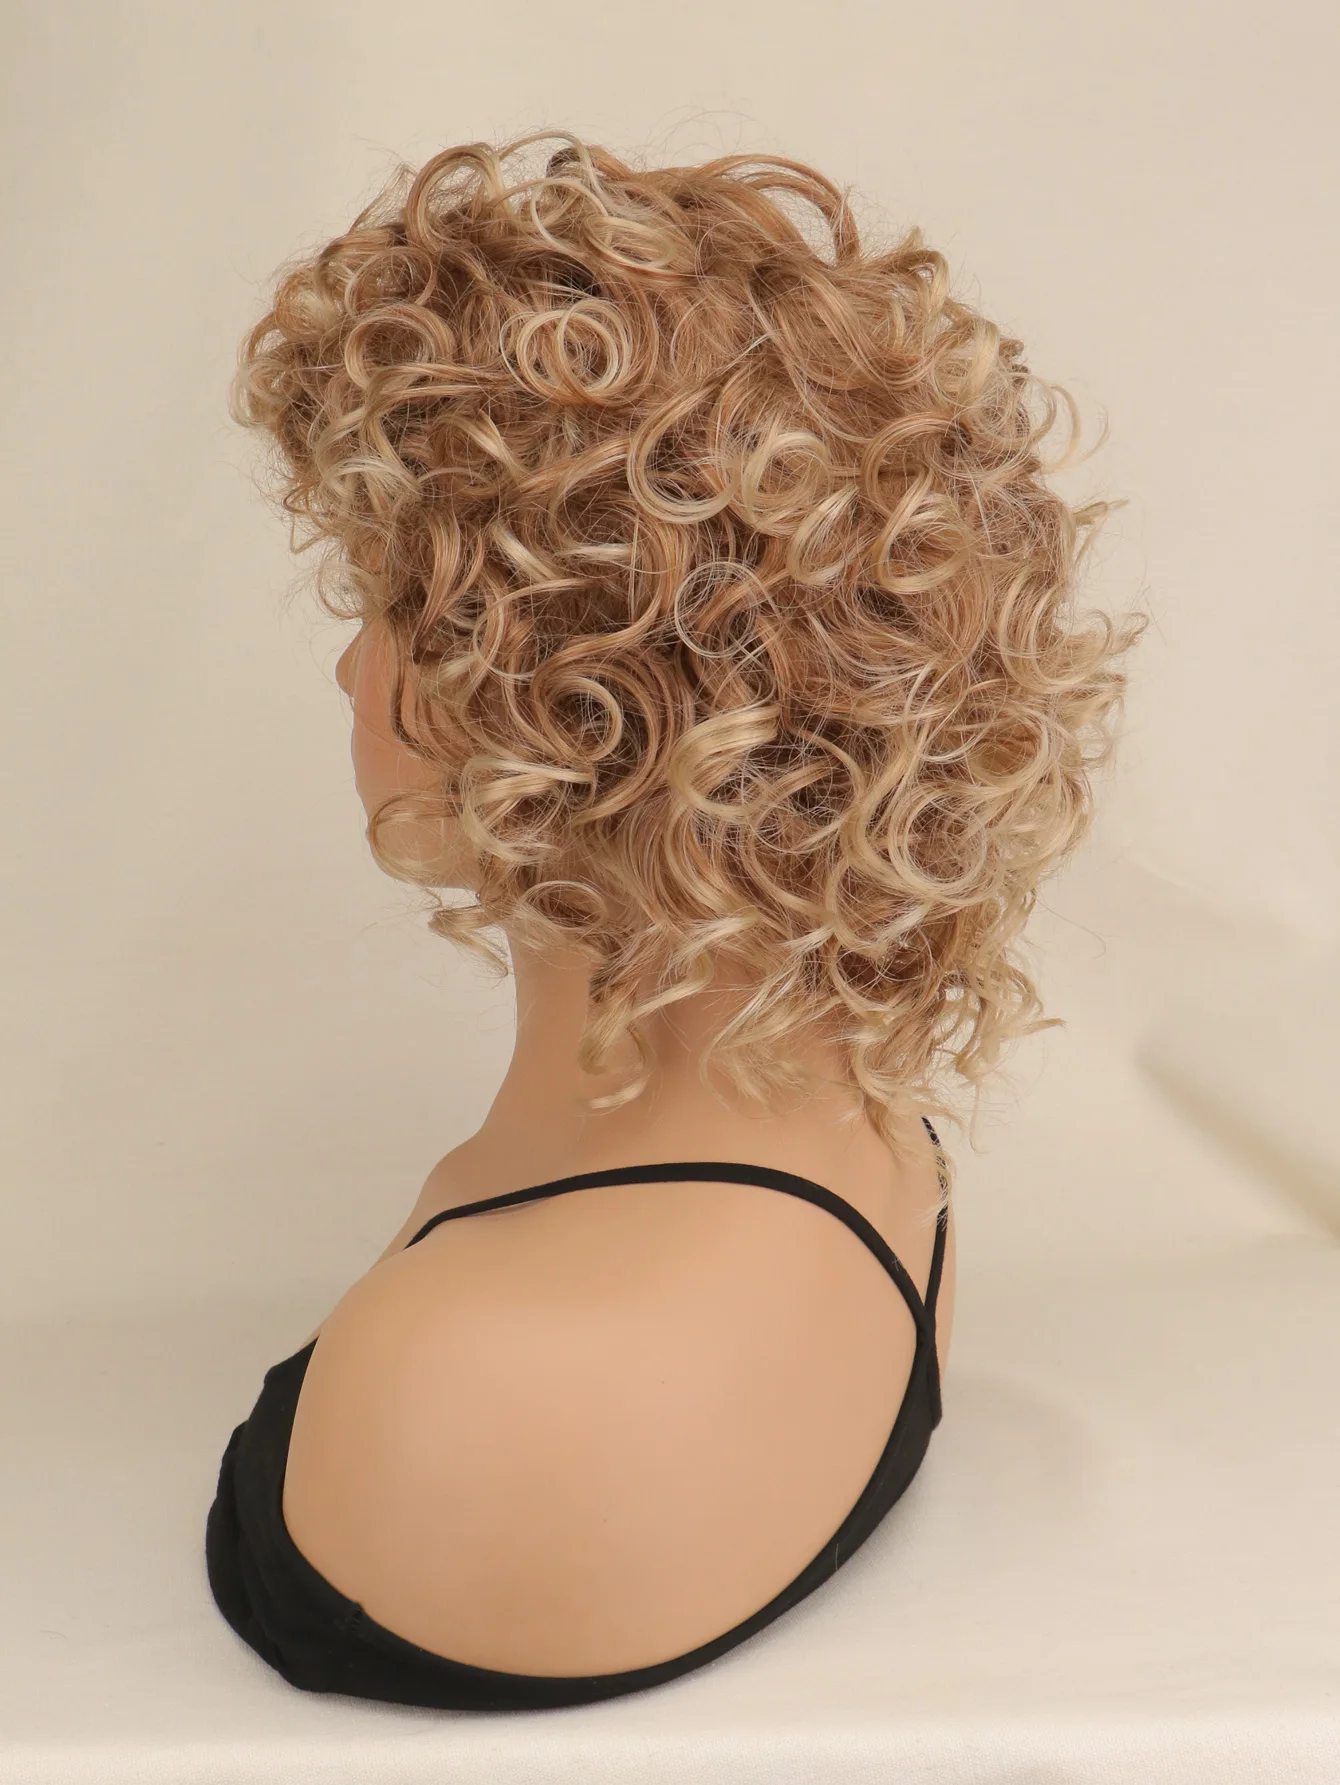 WHIMSICAL W Synthetic Women Mixed Blonde Brown Short Curly Wigs Natural Hair Wigs Heat Resistant Hair Wig for Women